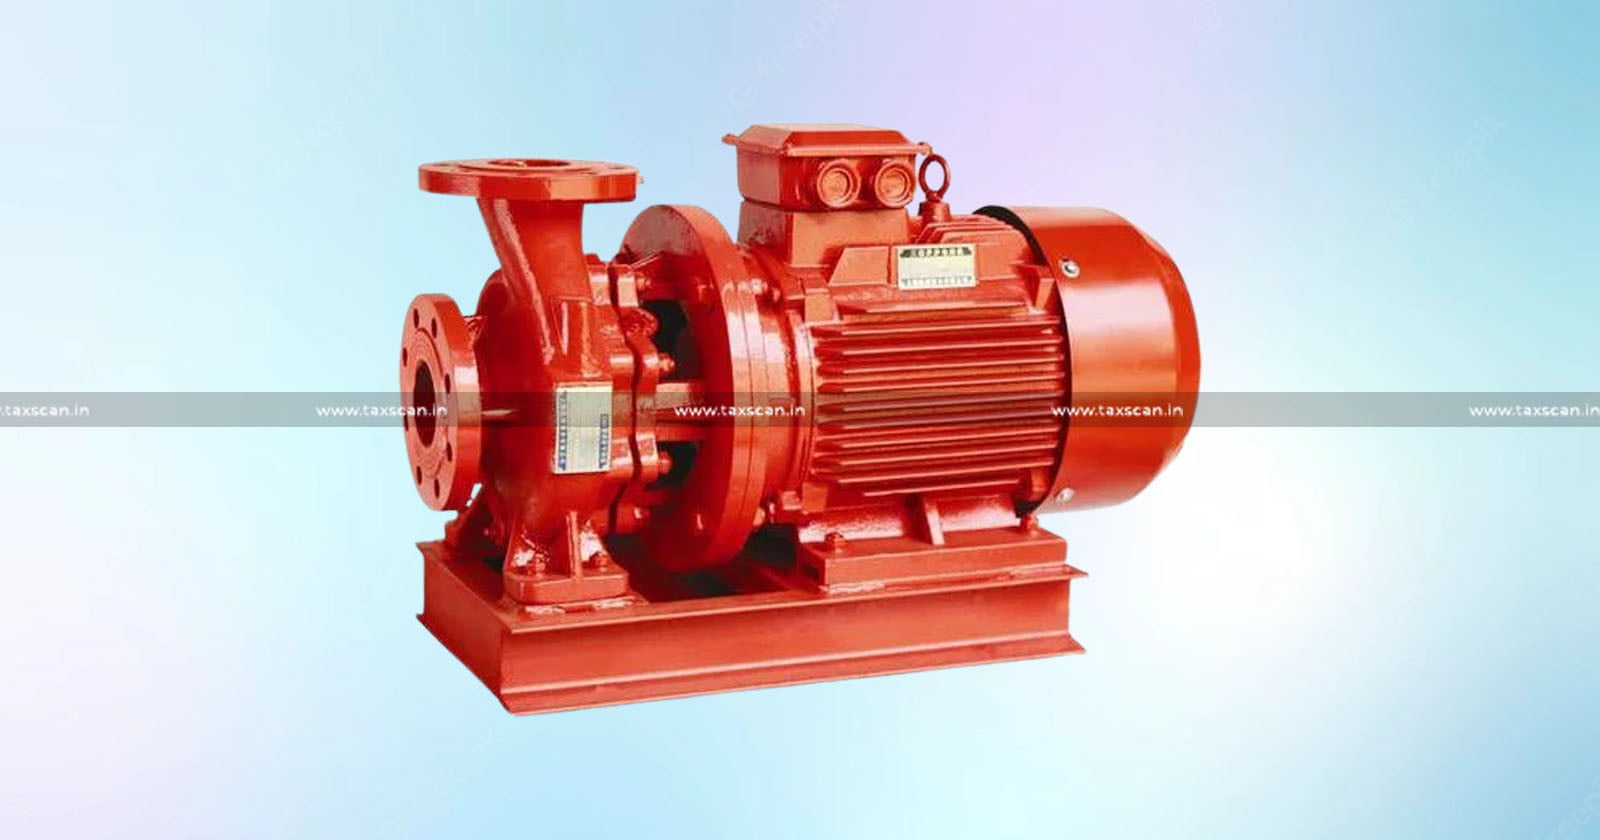 Power Driven Pumps - Manufacture - BIS specification - ISI Certification - SSI Exemption - CESTAT - Excise - customs - Service tax - Taxscan